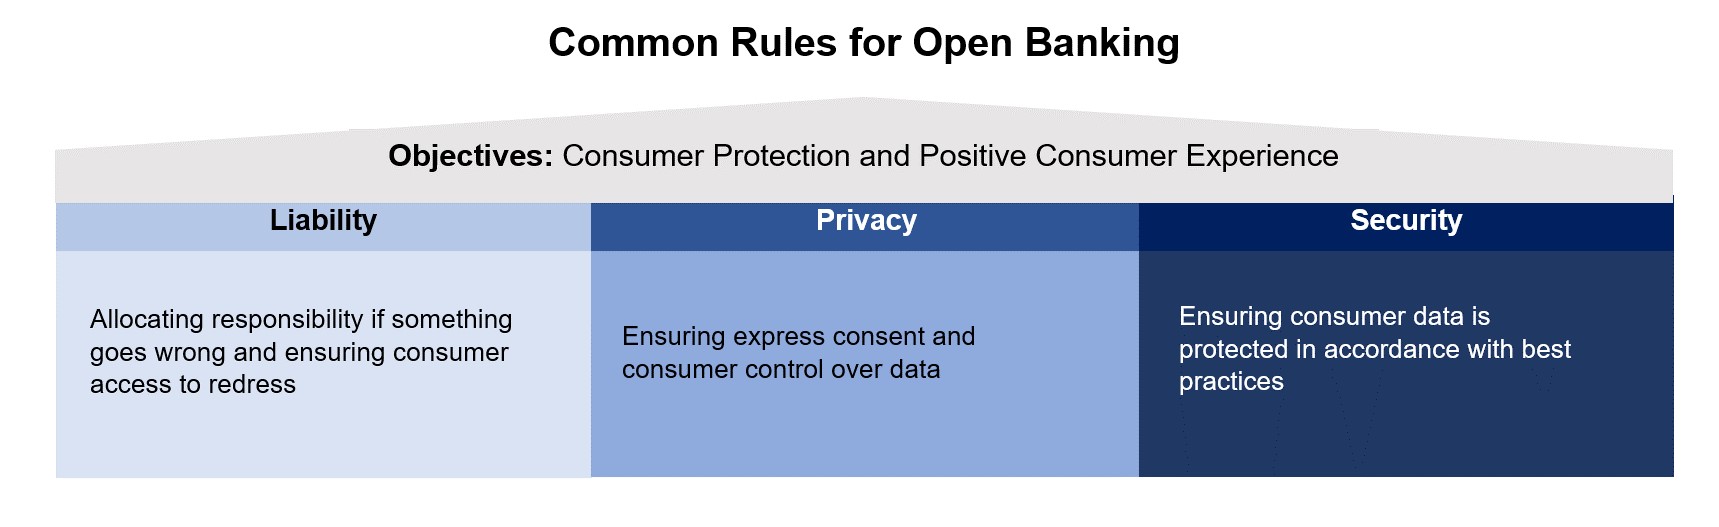 Common Rules for Open Banking